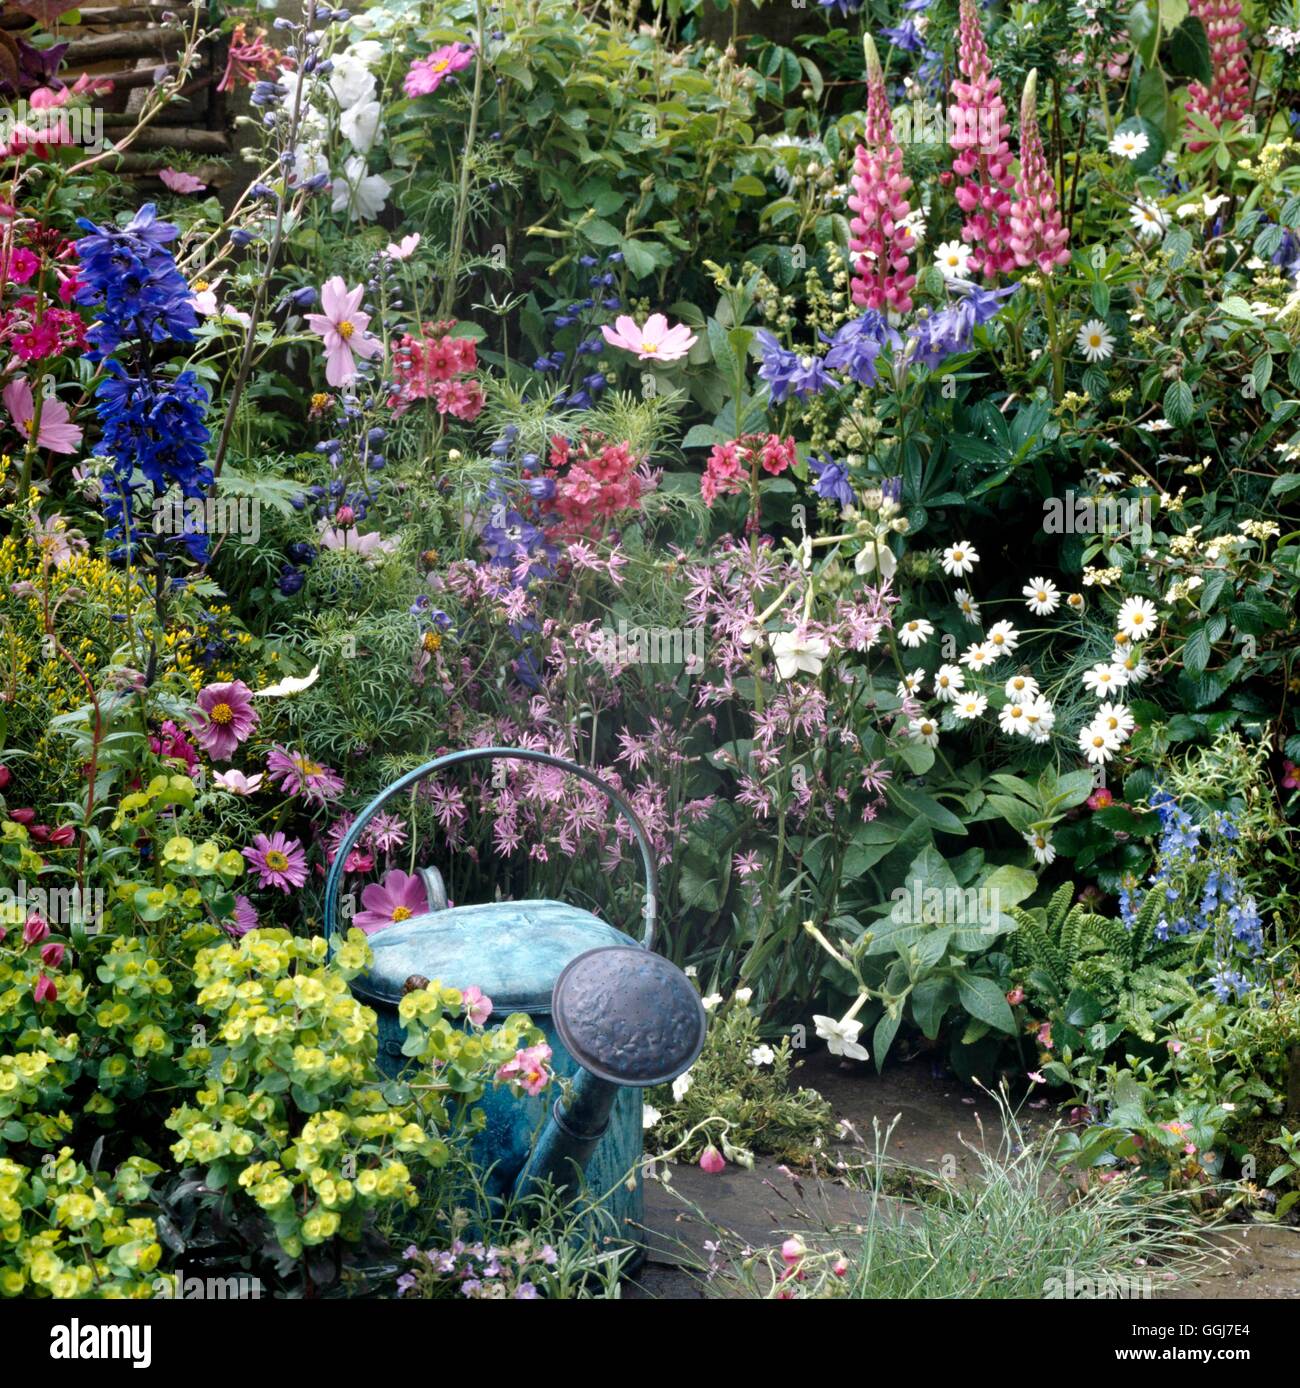 Cottage Garden - (Please credit: Photos Horticultural/ Writtle College) (Chelsea Flower Show 1997)   COT073418  Compul Stock Photo